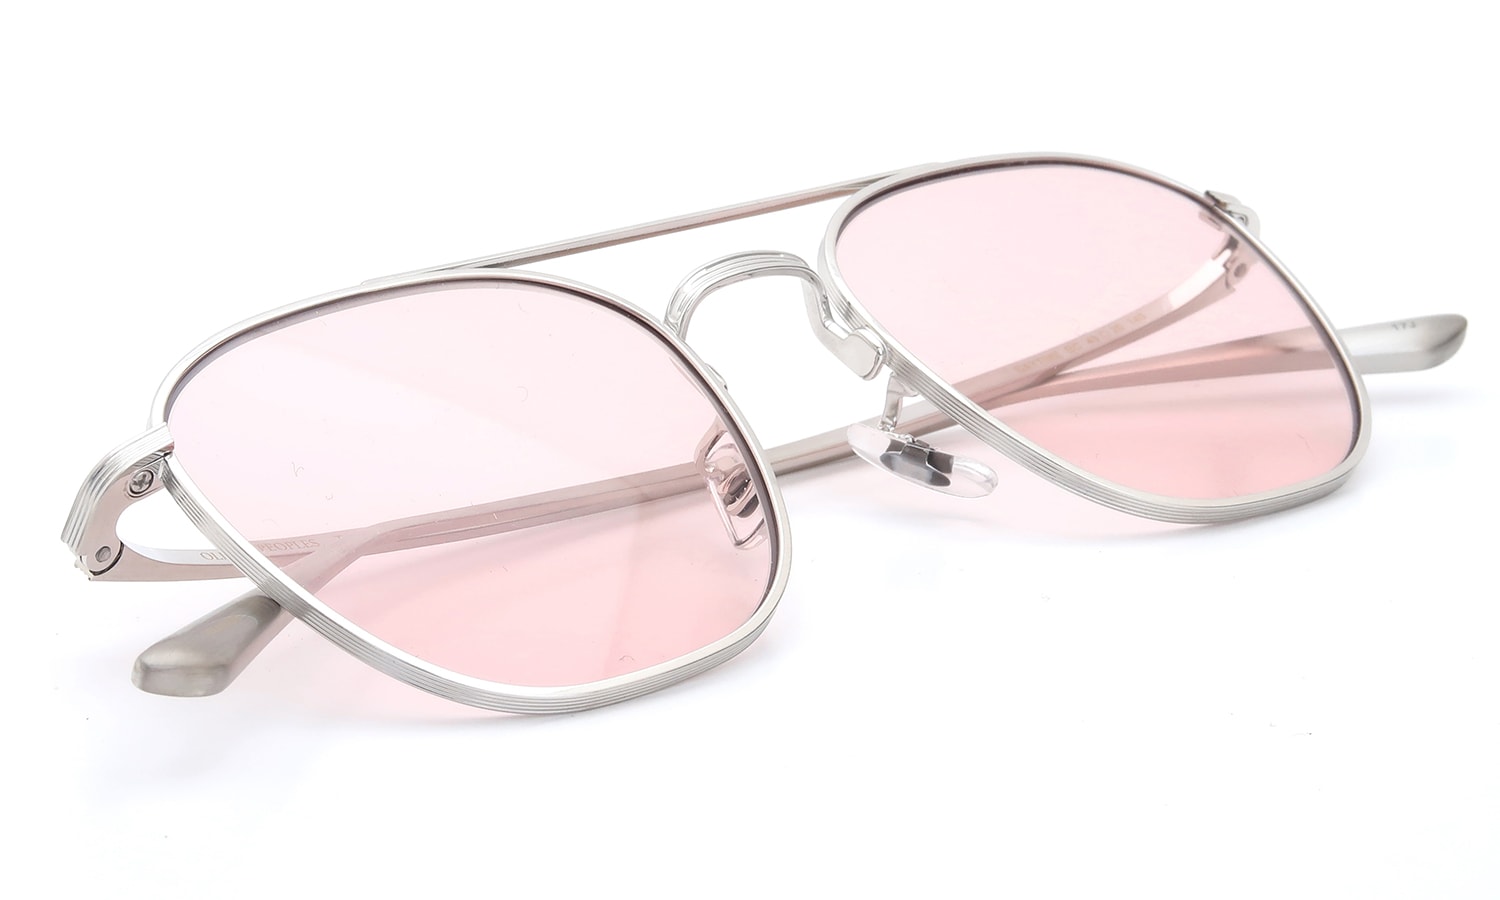 OLIVER PEOPLES × THE ROW DAYTIME BC